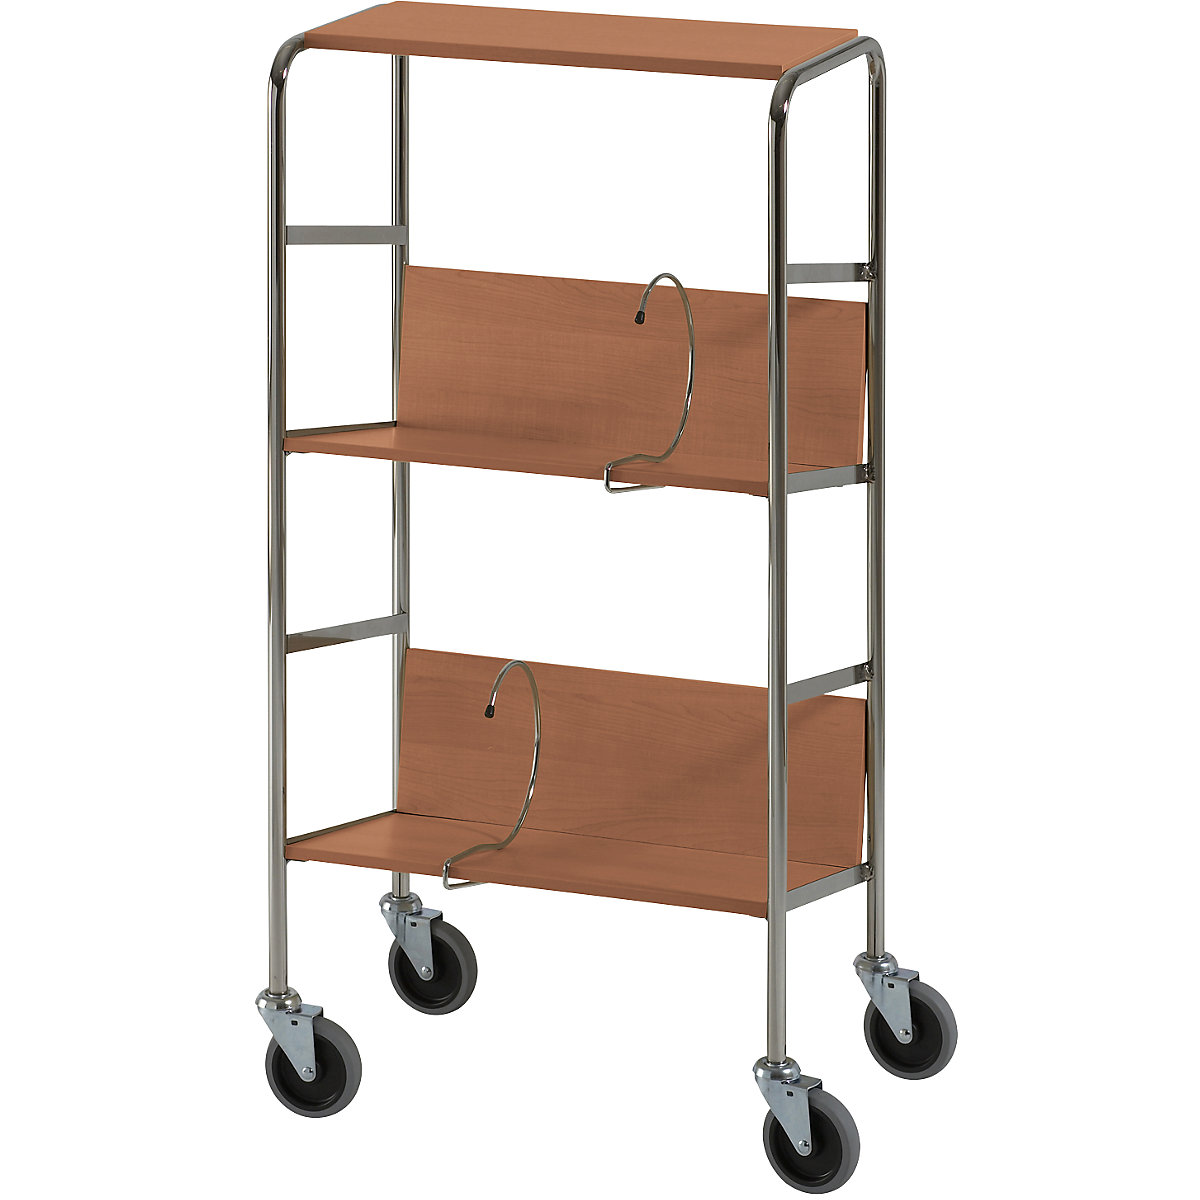 File trolley with top shelf, chrome plated – HelgeNyberg, 3 shelves, LxWxH 550 x 340 x 1060 mm, cherry finish, 5+ items-14